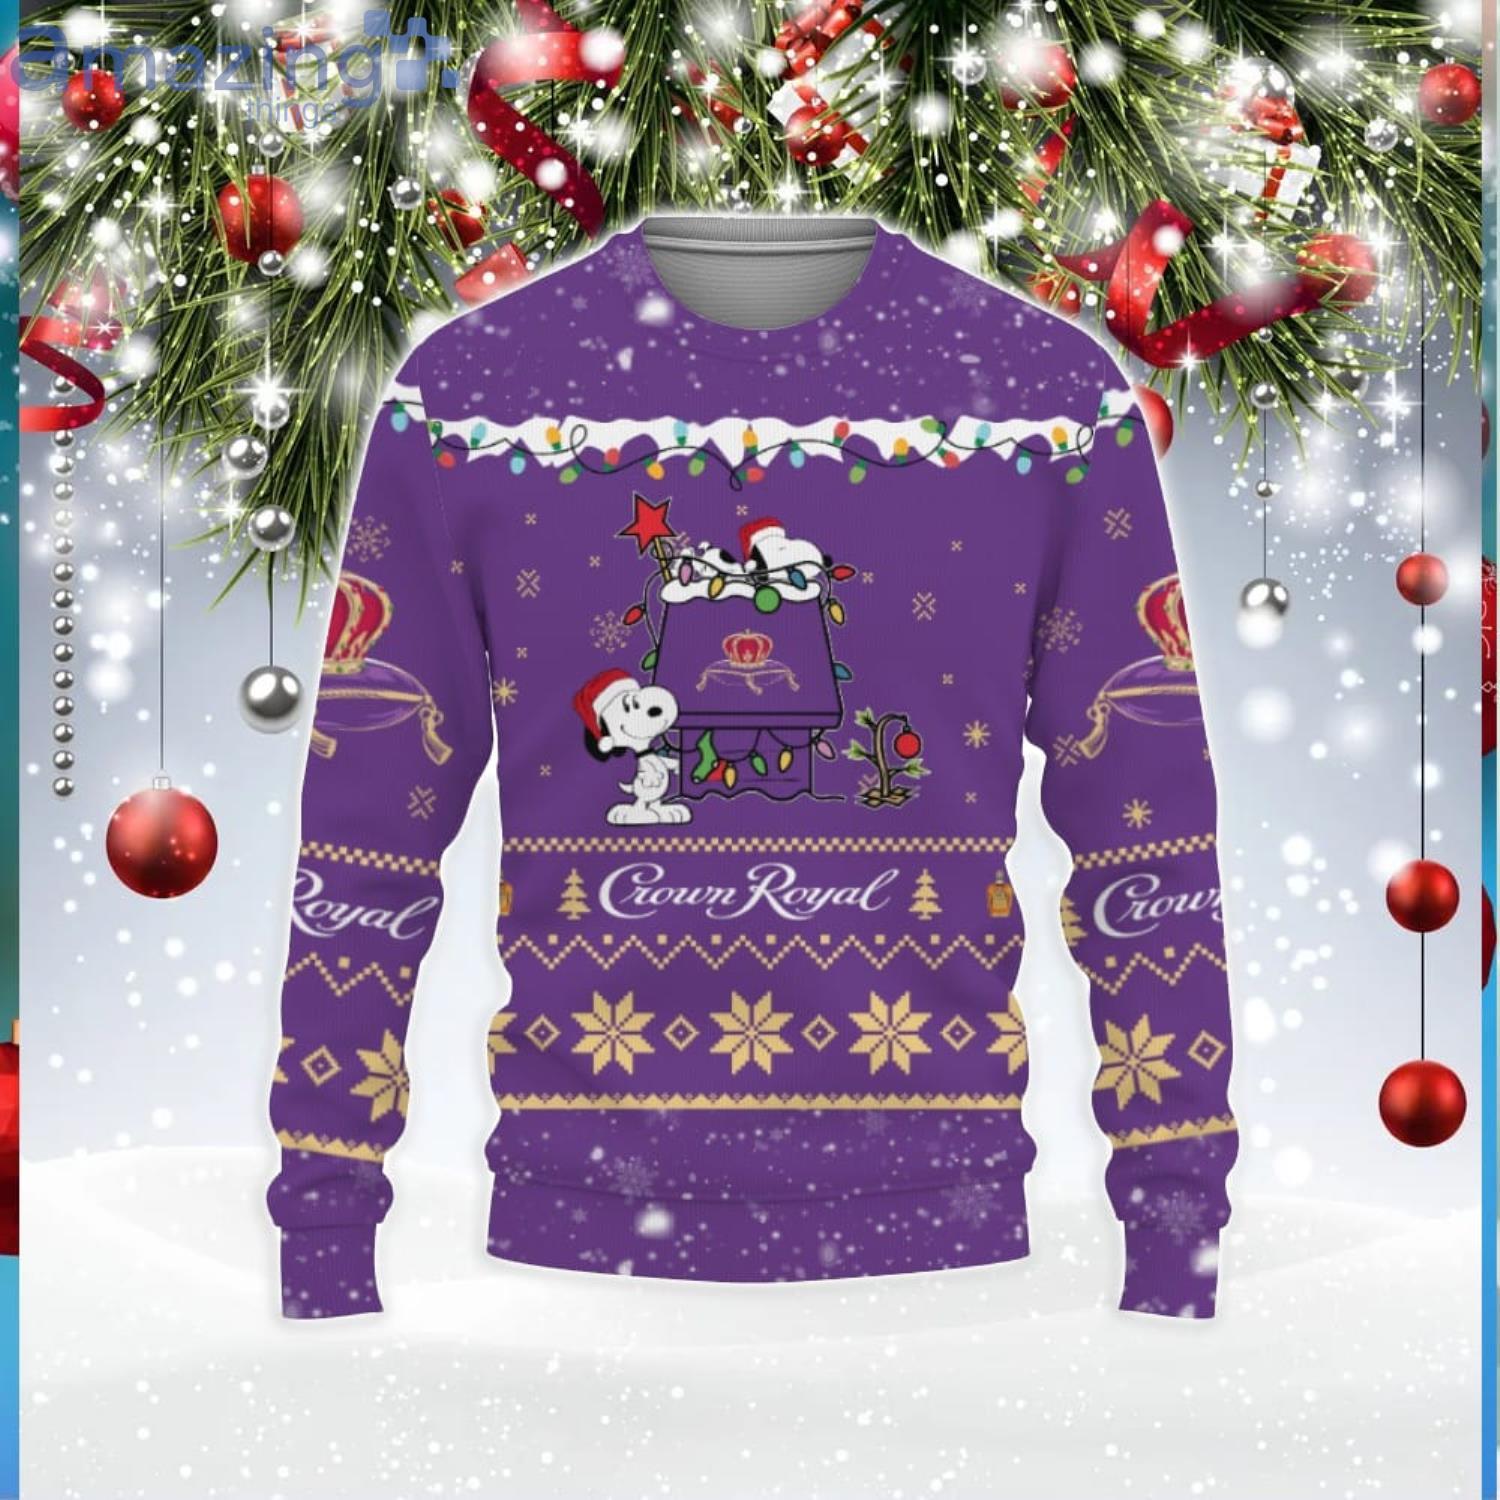 Crown Royal Whiskey American Whiskey Beers Merry Christmas Snoopy House Cute Gift 3D Ugly Christmas Sweater Product Photo 1